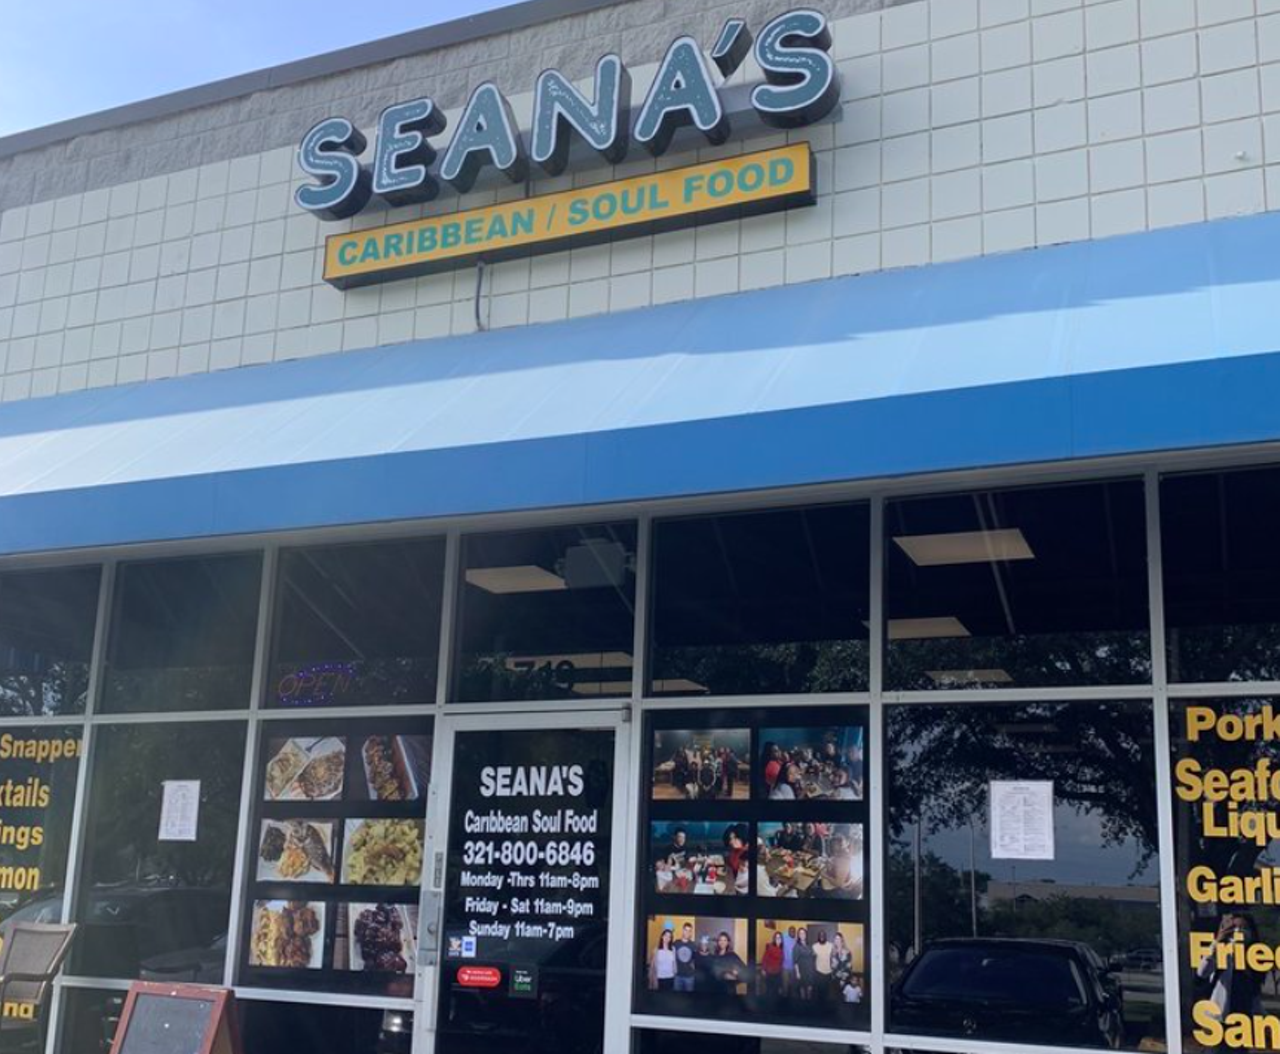 Seana’s
719 Good Homes Road, Orlando
Owned by the irrepressible Joshua Johnson, Seana's specializes in authentic, upscale Caribbean soul food and big flavors in West Orlando. Don't skip dessert!